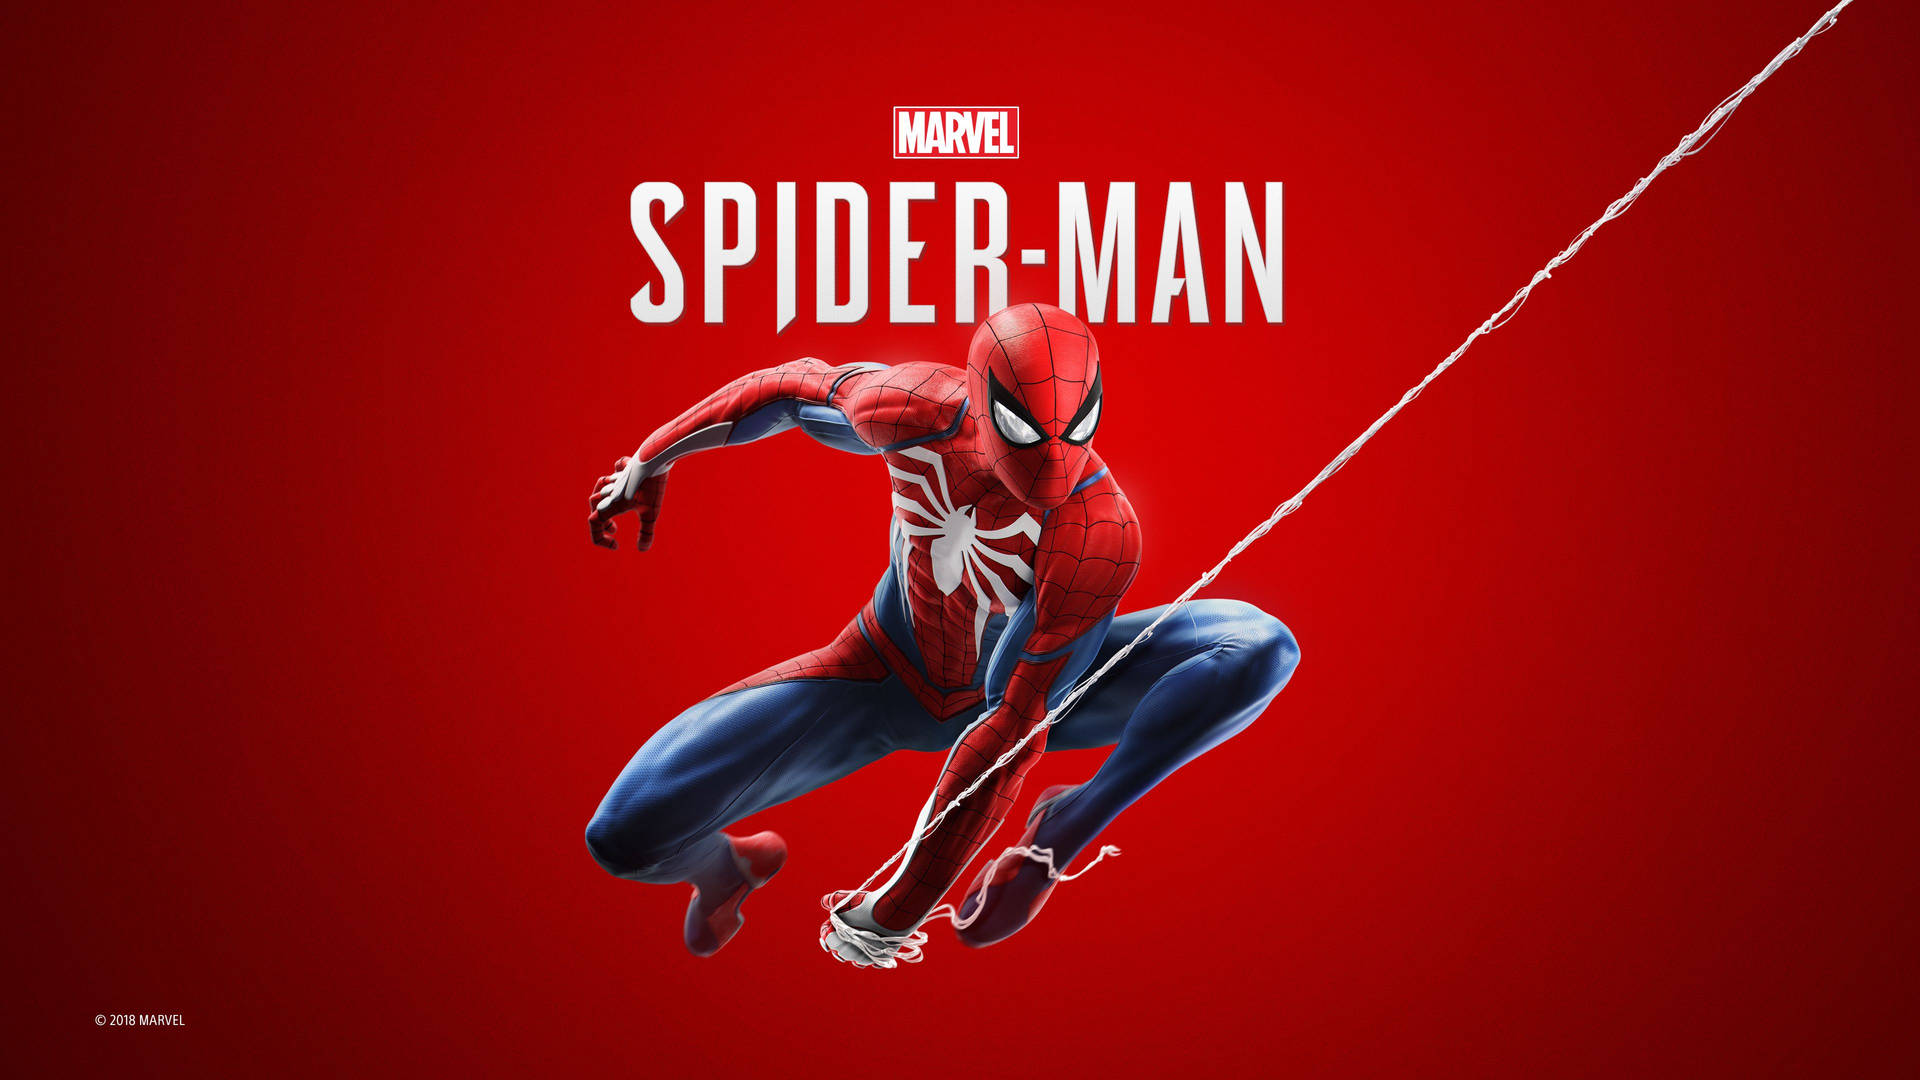 Spiderman holding on his spider web on a red background, Marvel super heroes.